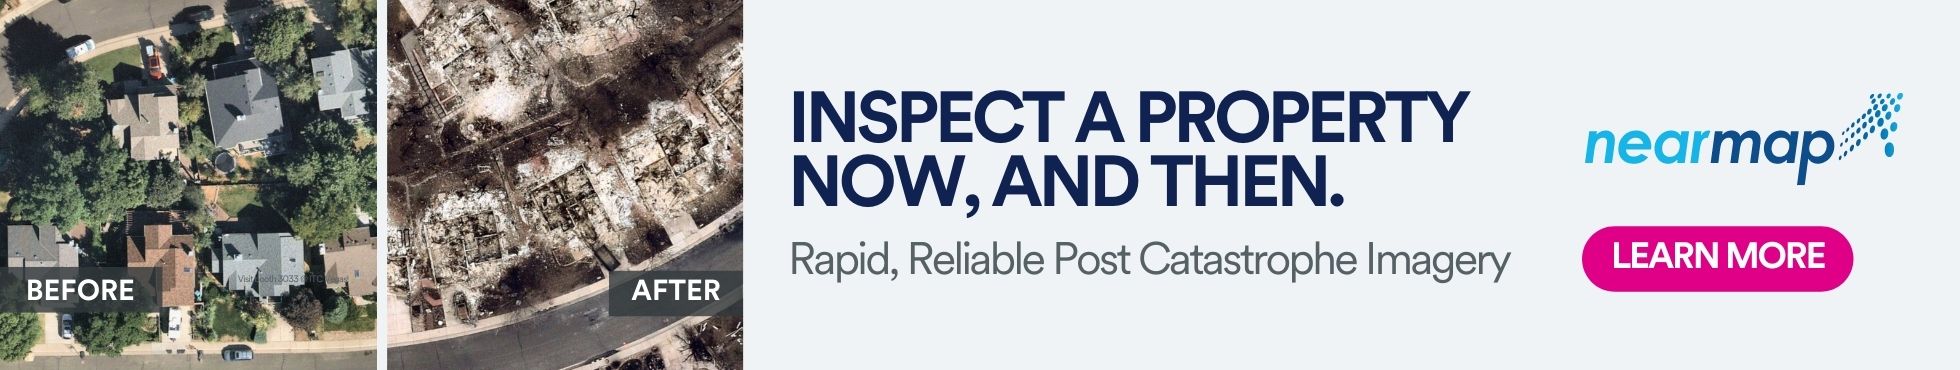 Inspect a Property Now, and Then. | Rapid, Reliable Post Catastrophe Imagery from Nearmap